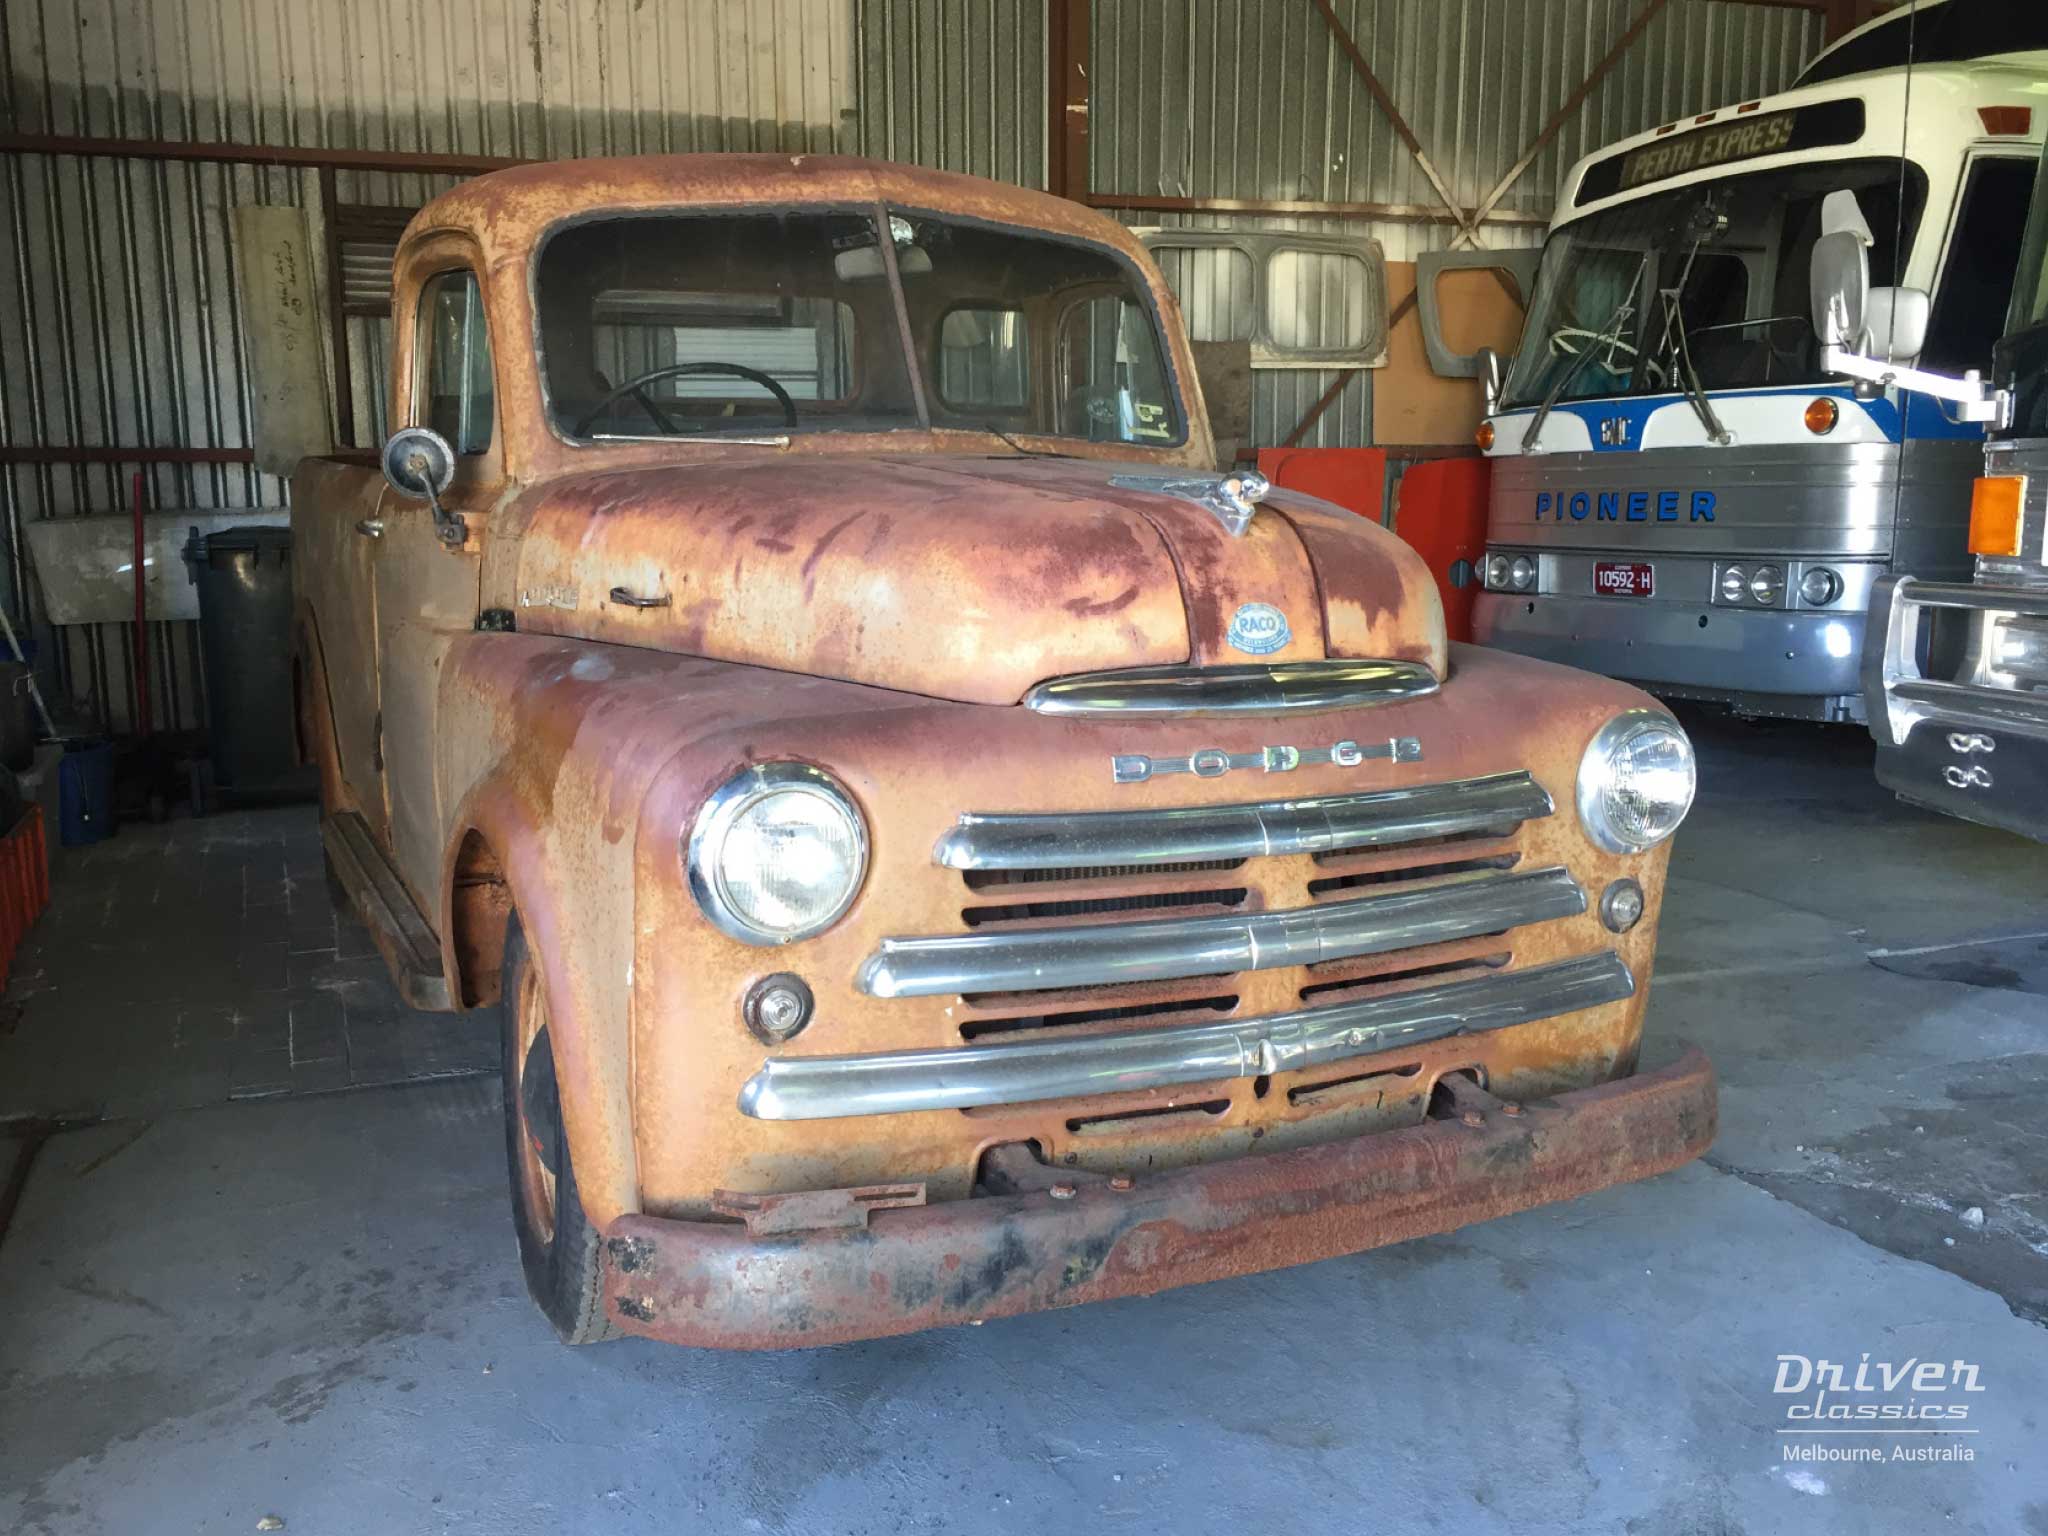 1950 Dodge Pilot House Pick Up Truck. Looks like tow mater from cars